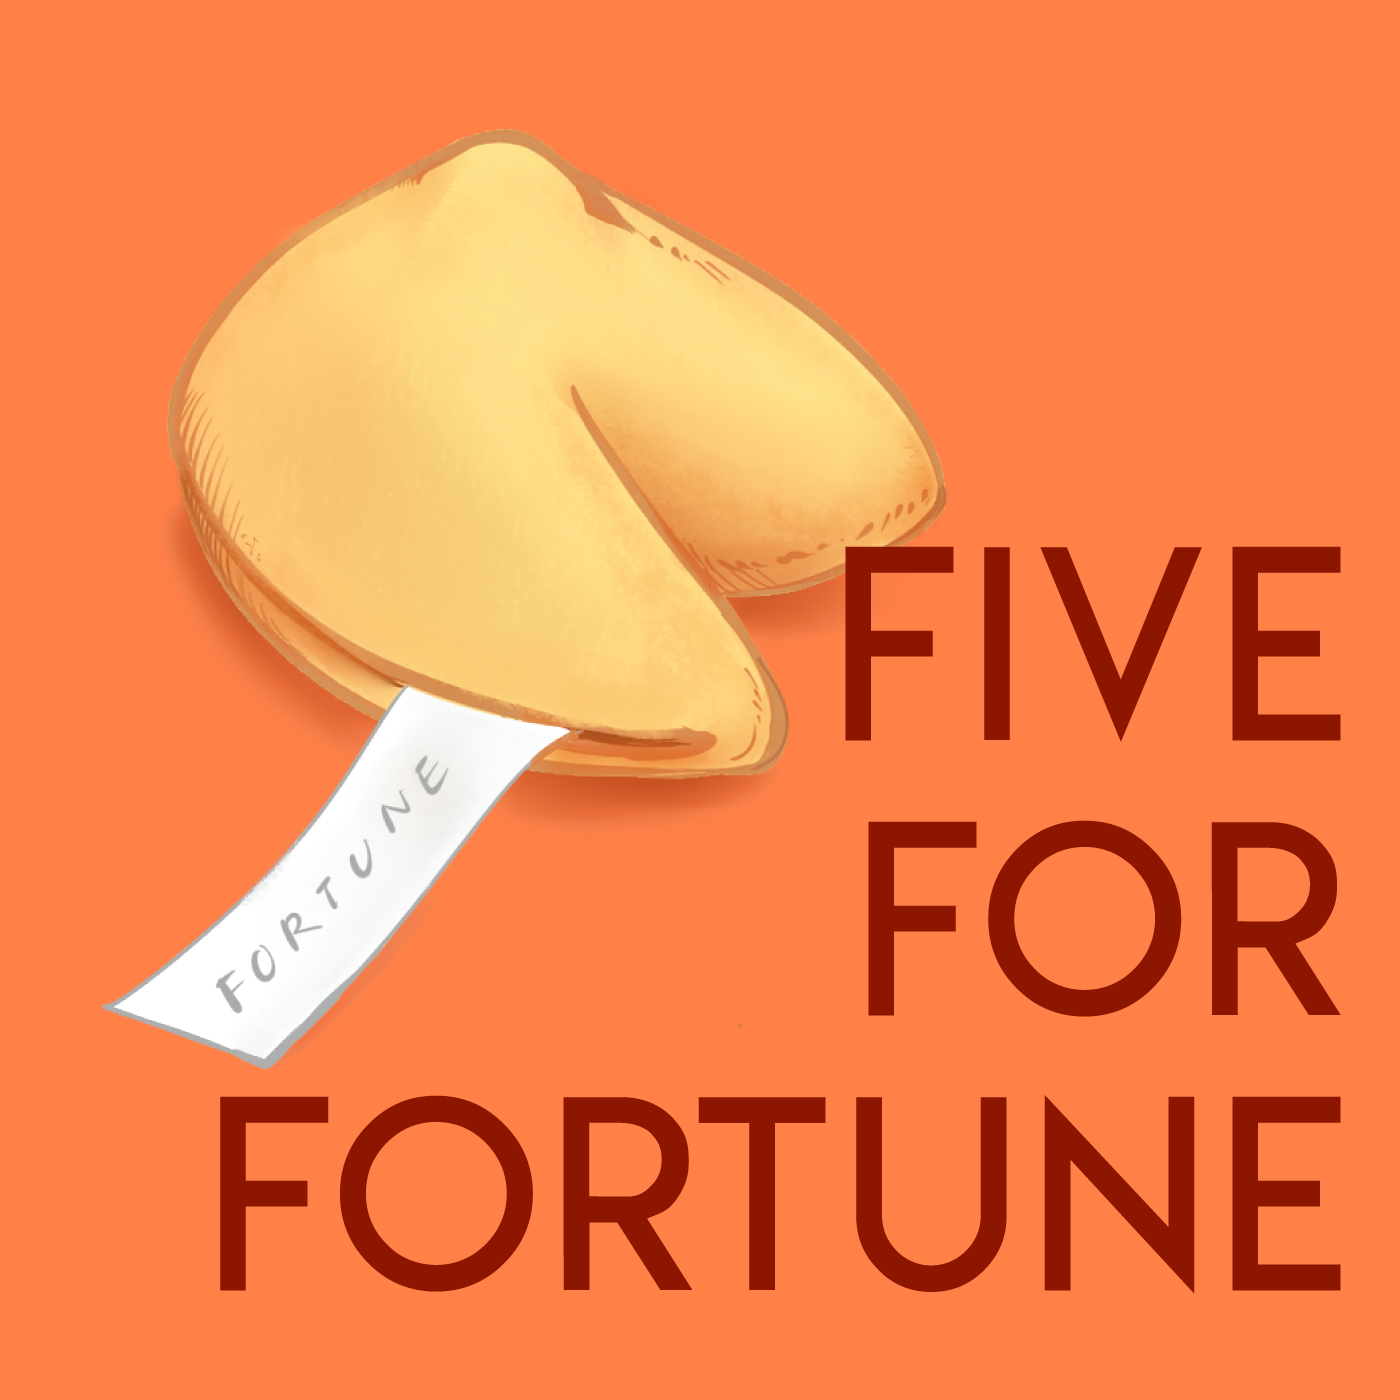 Five For Fortune Ep7: 5 Inspiring Facts About Women Entrepreneurs